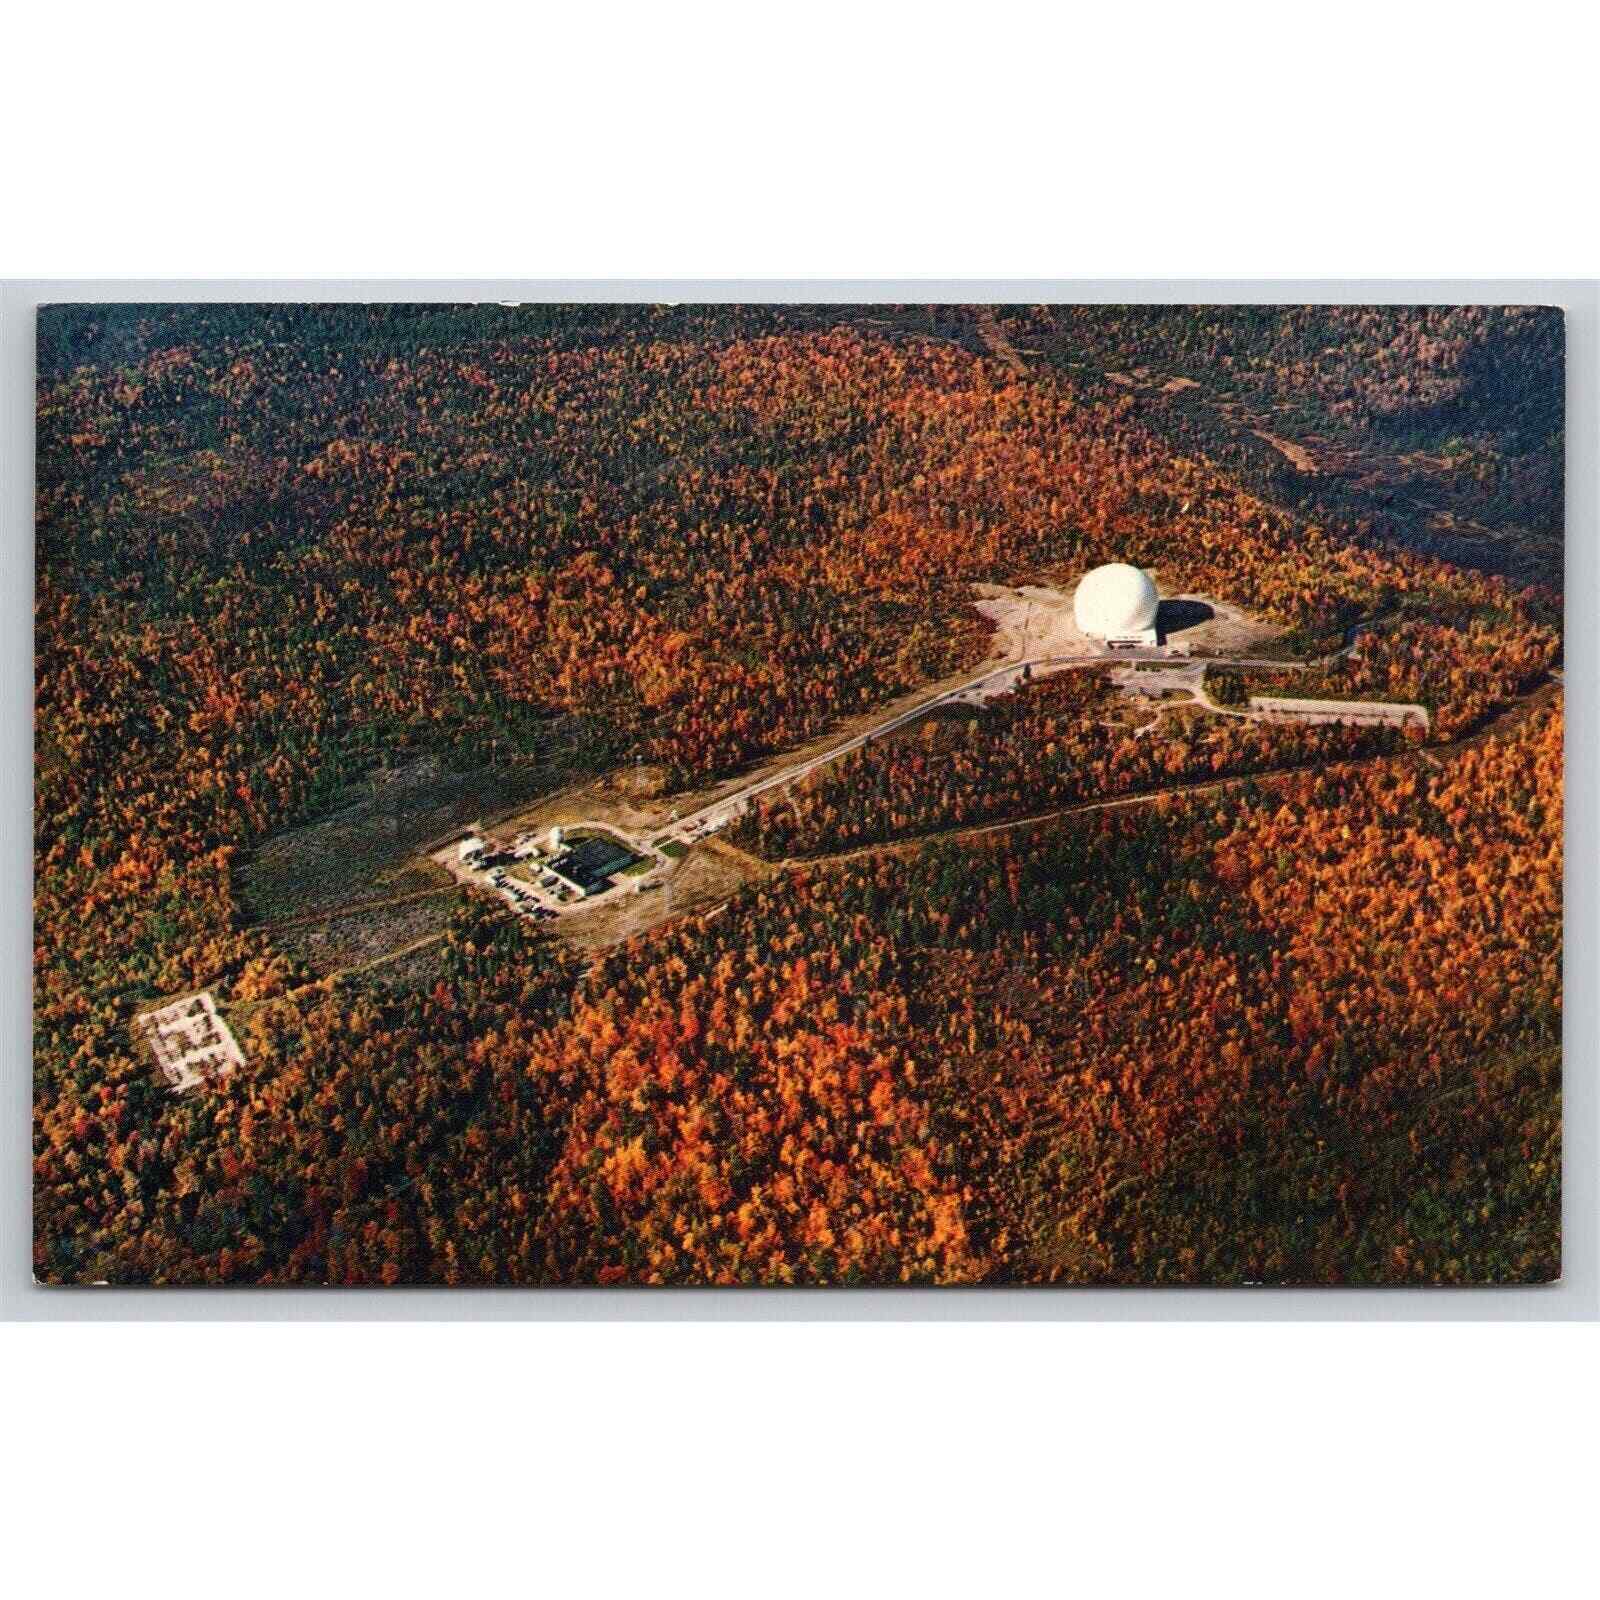 Postcard ME Andover Earth Station Comsat Communications Aerial View